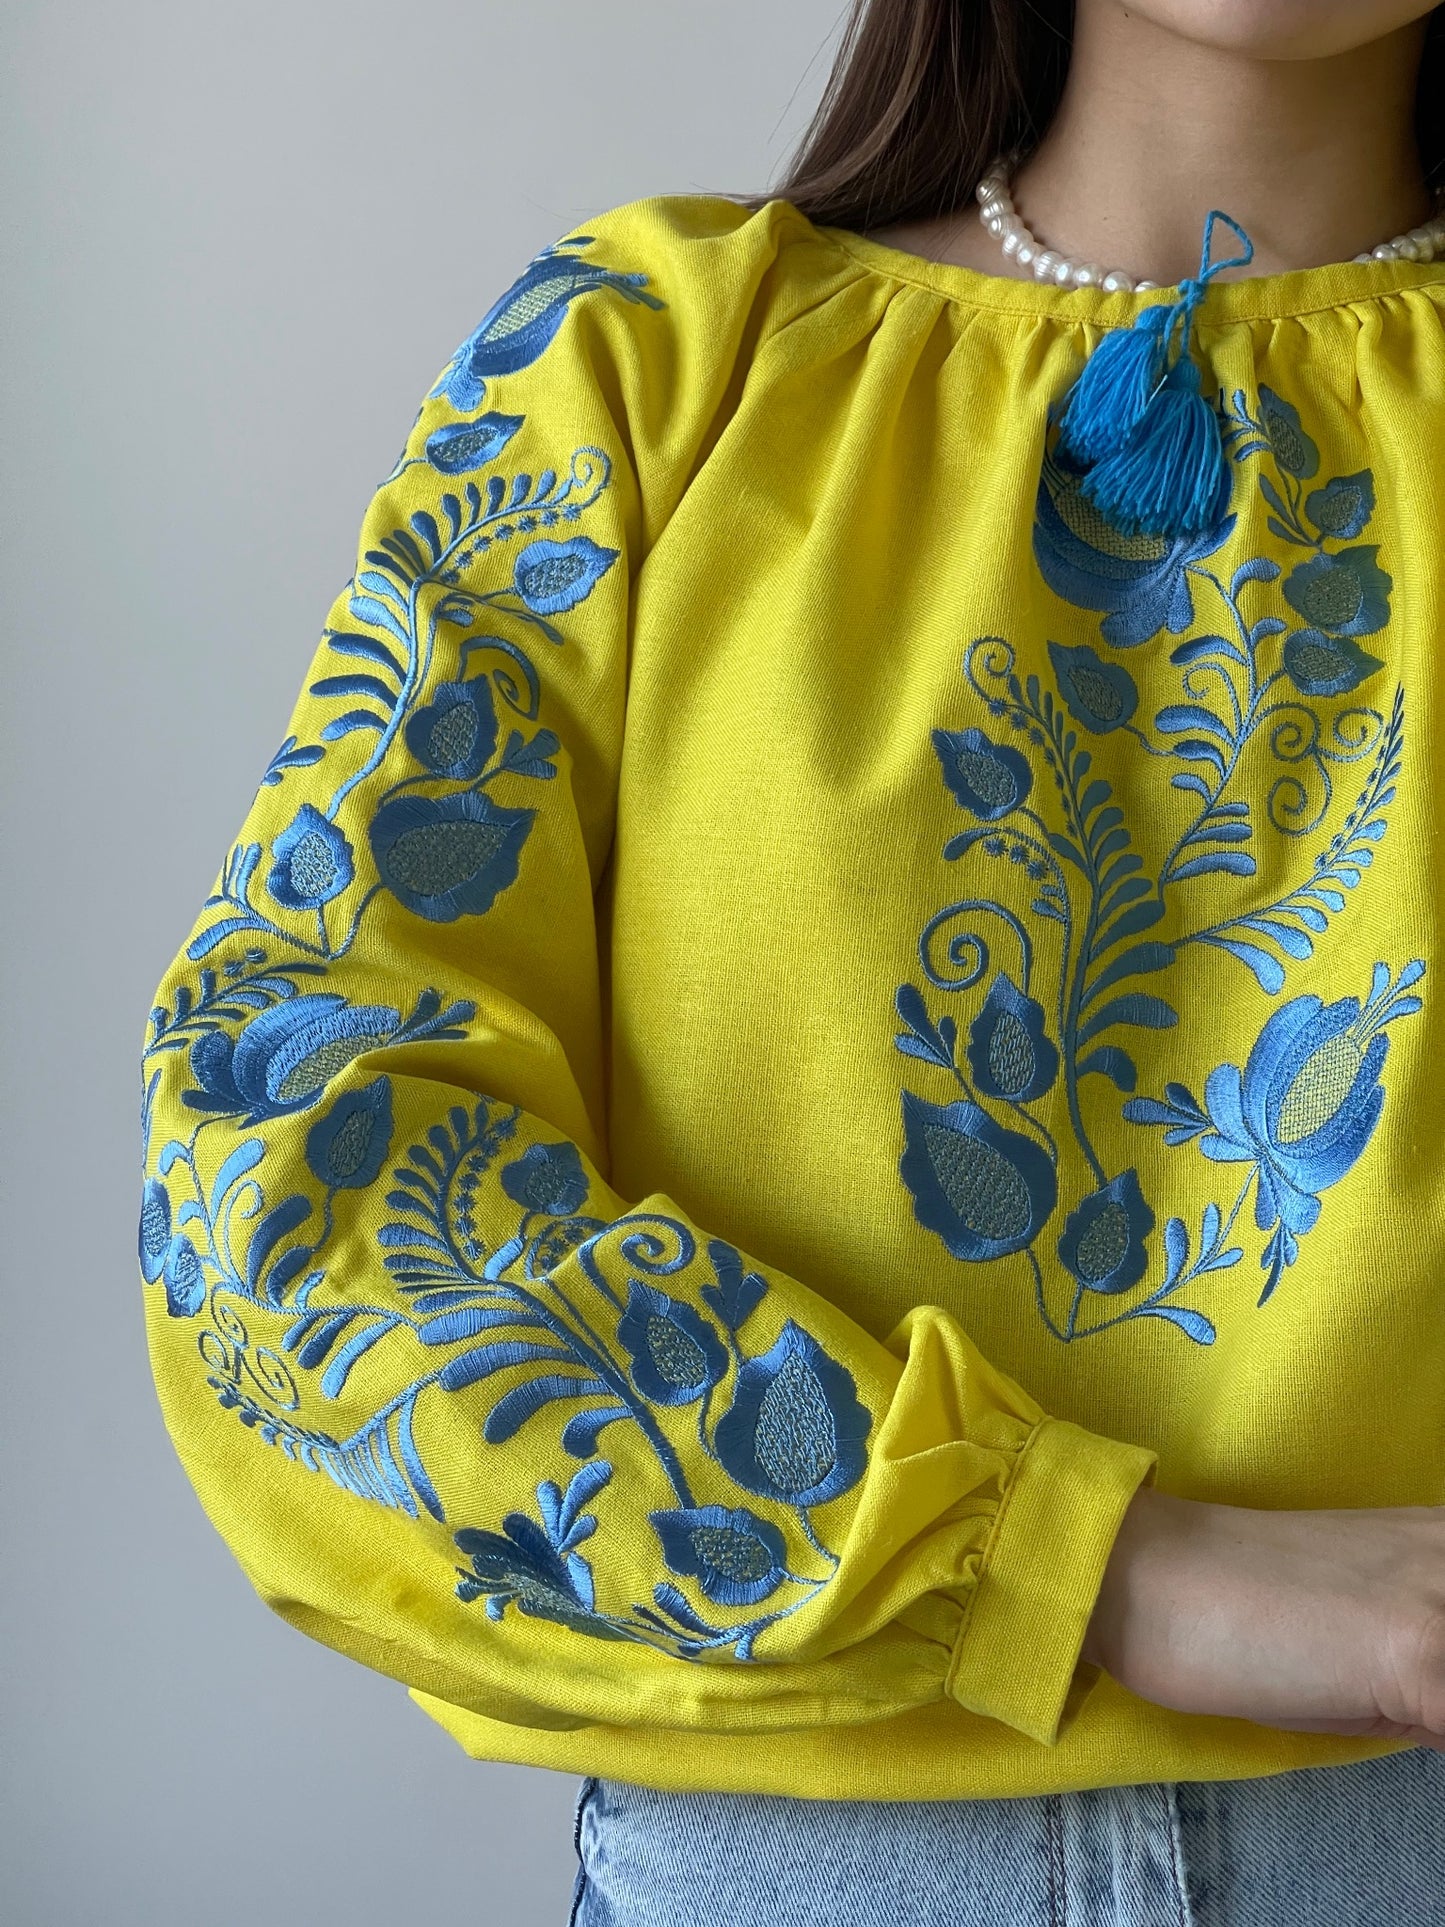 The Yellow Women's Blouse with Blue Embroidery